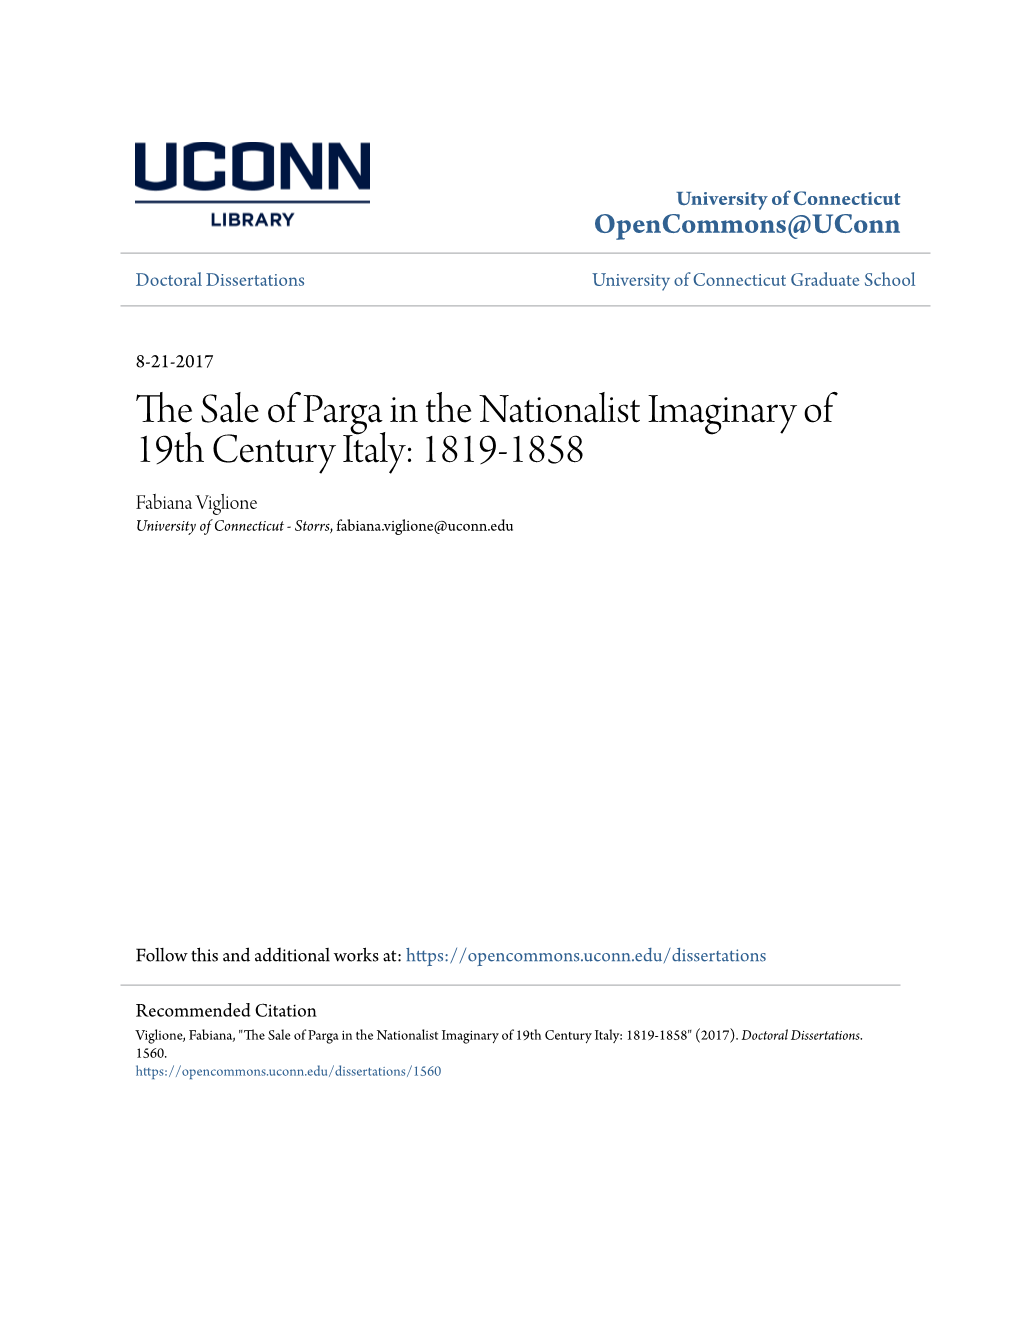 The Sale of Parga in the Nationalist Imaginary of 19Th Century Italy: 1819-1858